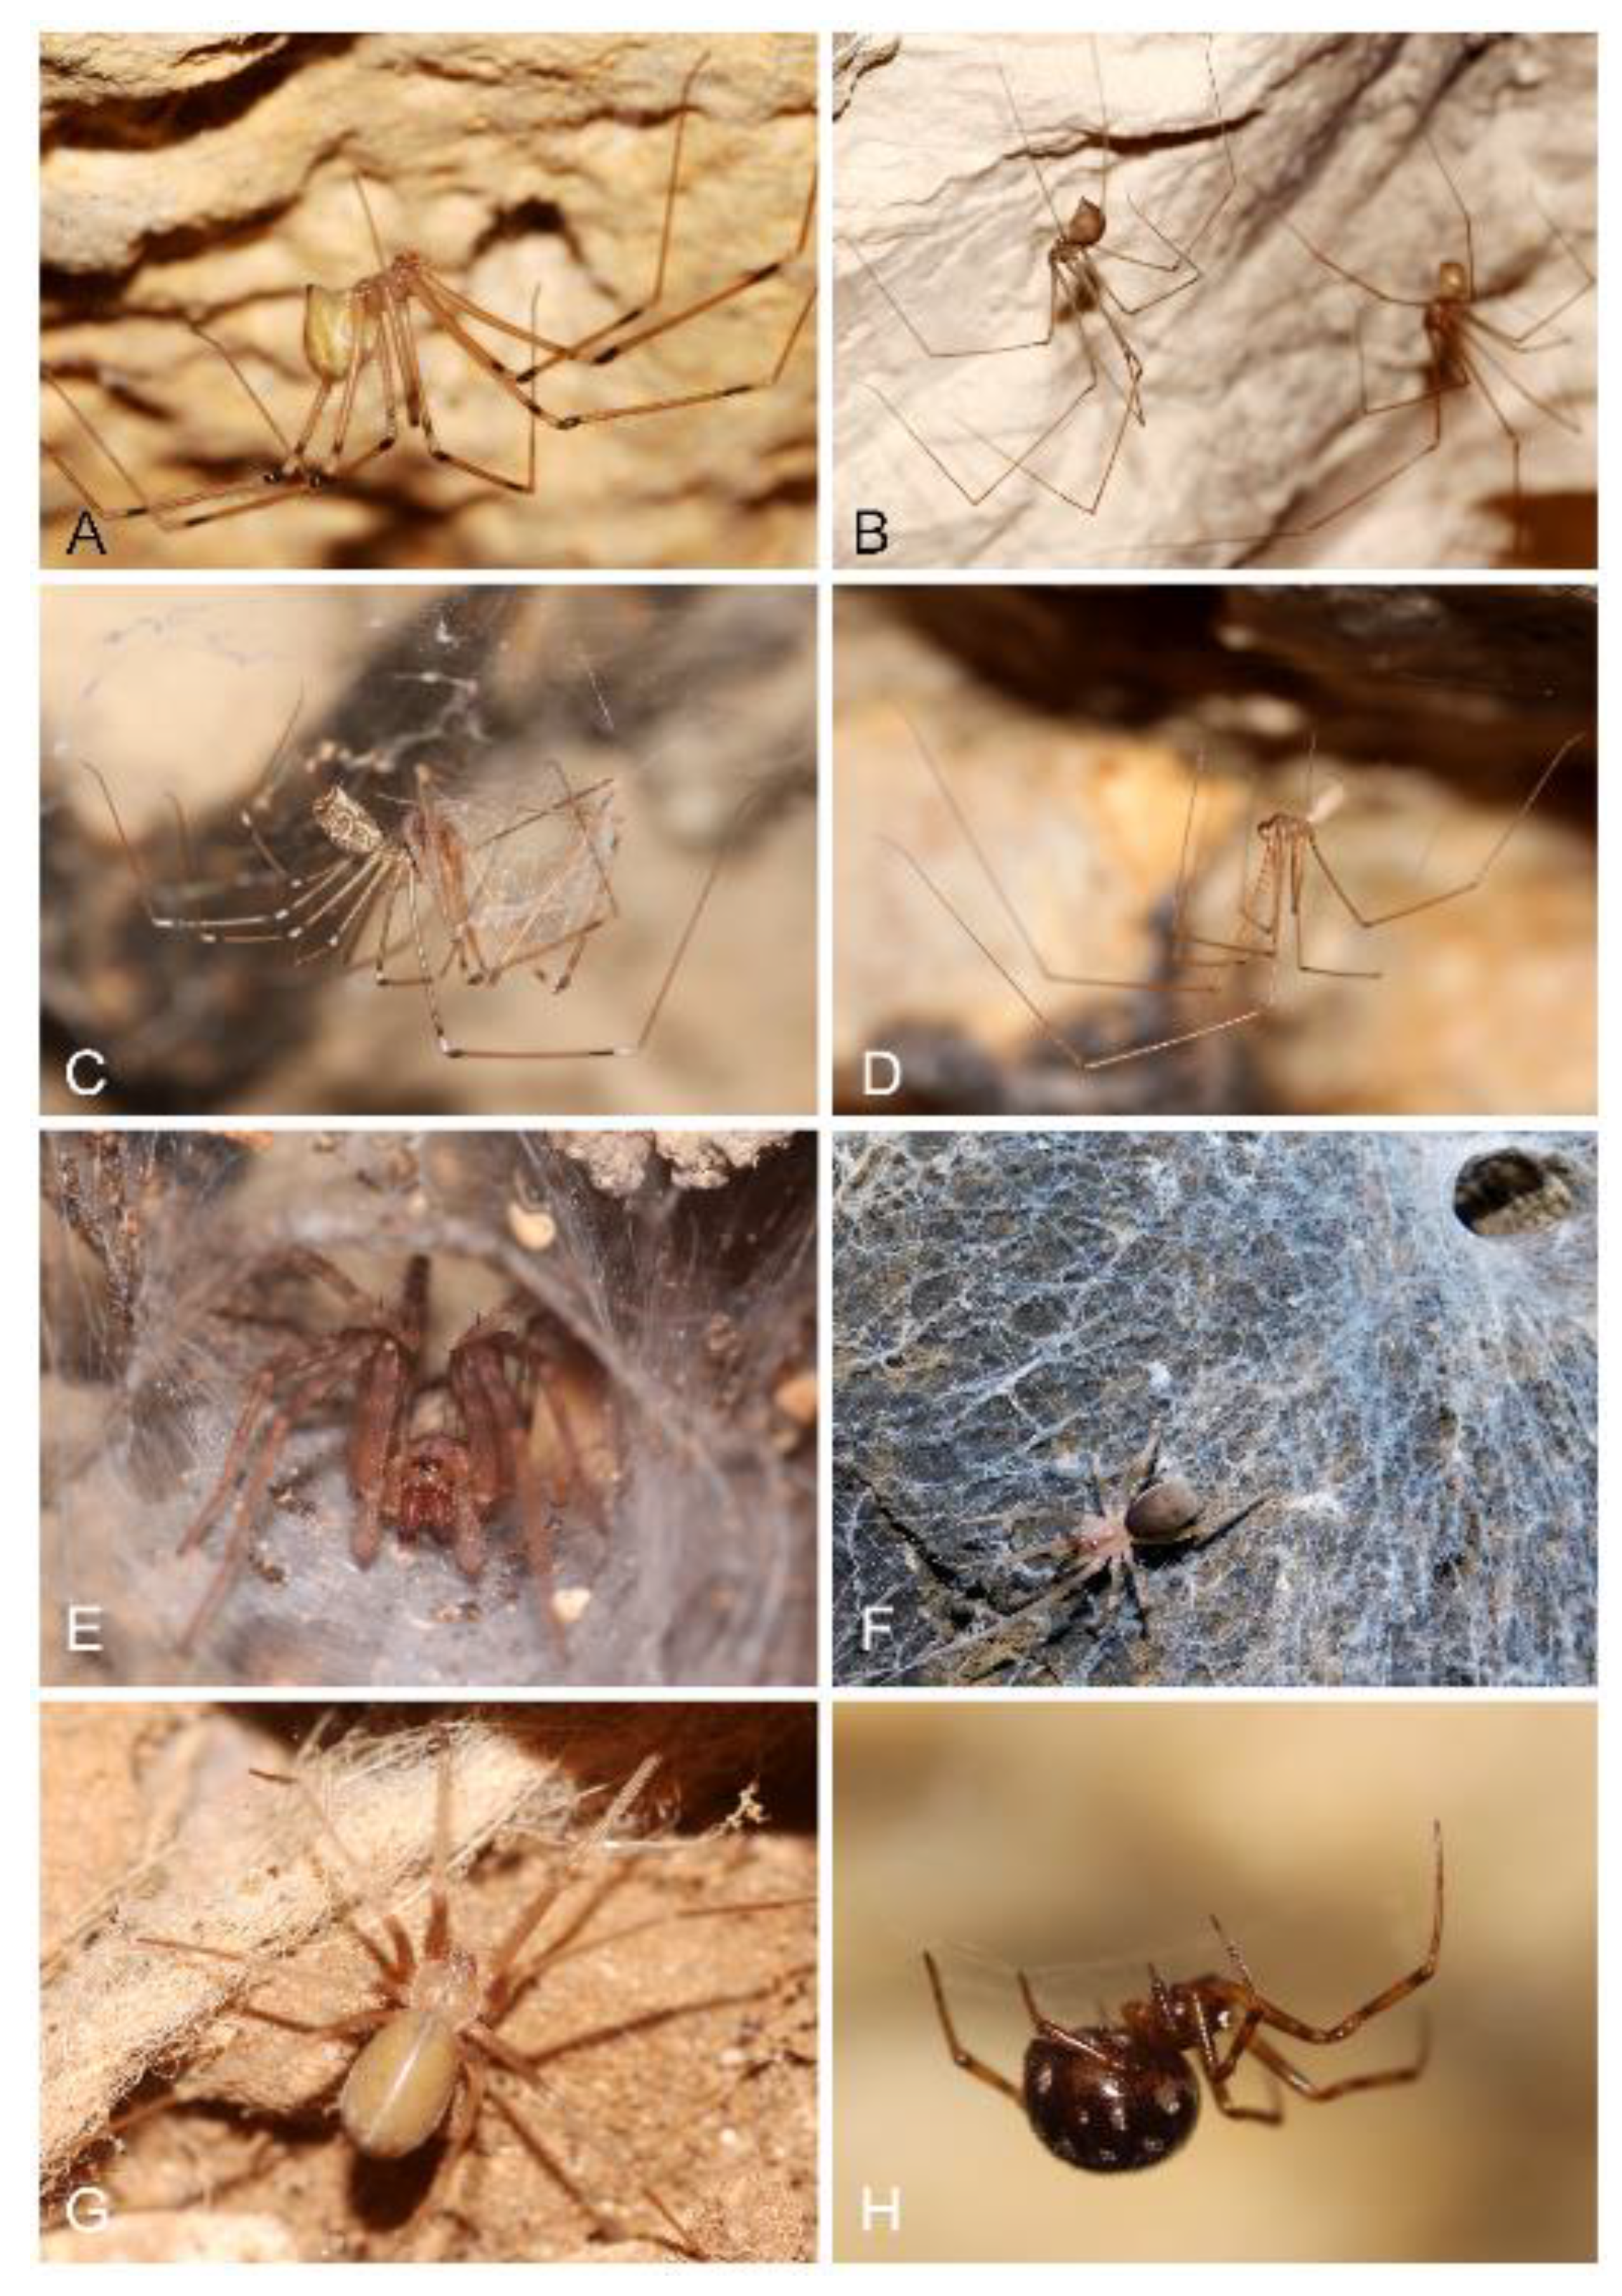 7 new spider species discovered in caves in Israel